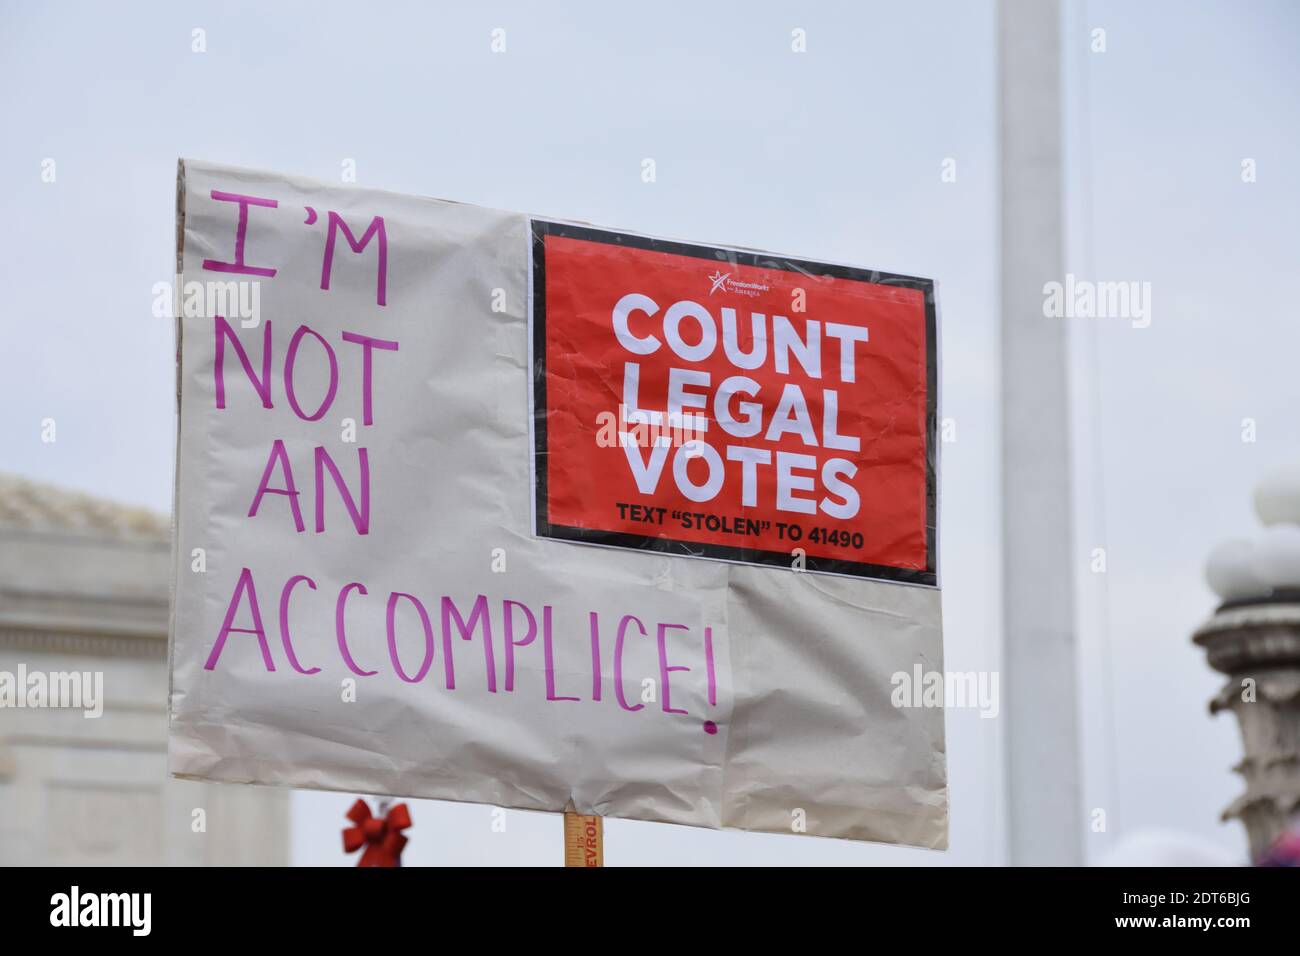 Washington DC. March for Trump to demand election transparency and integrity at US Supreme Court. Close-up political sign ‘Count legal votes’. Stock Photo